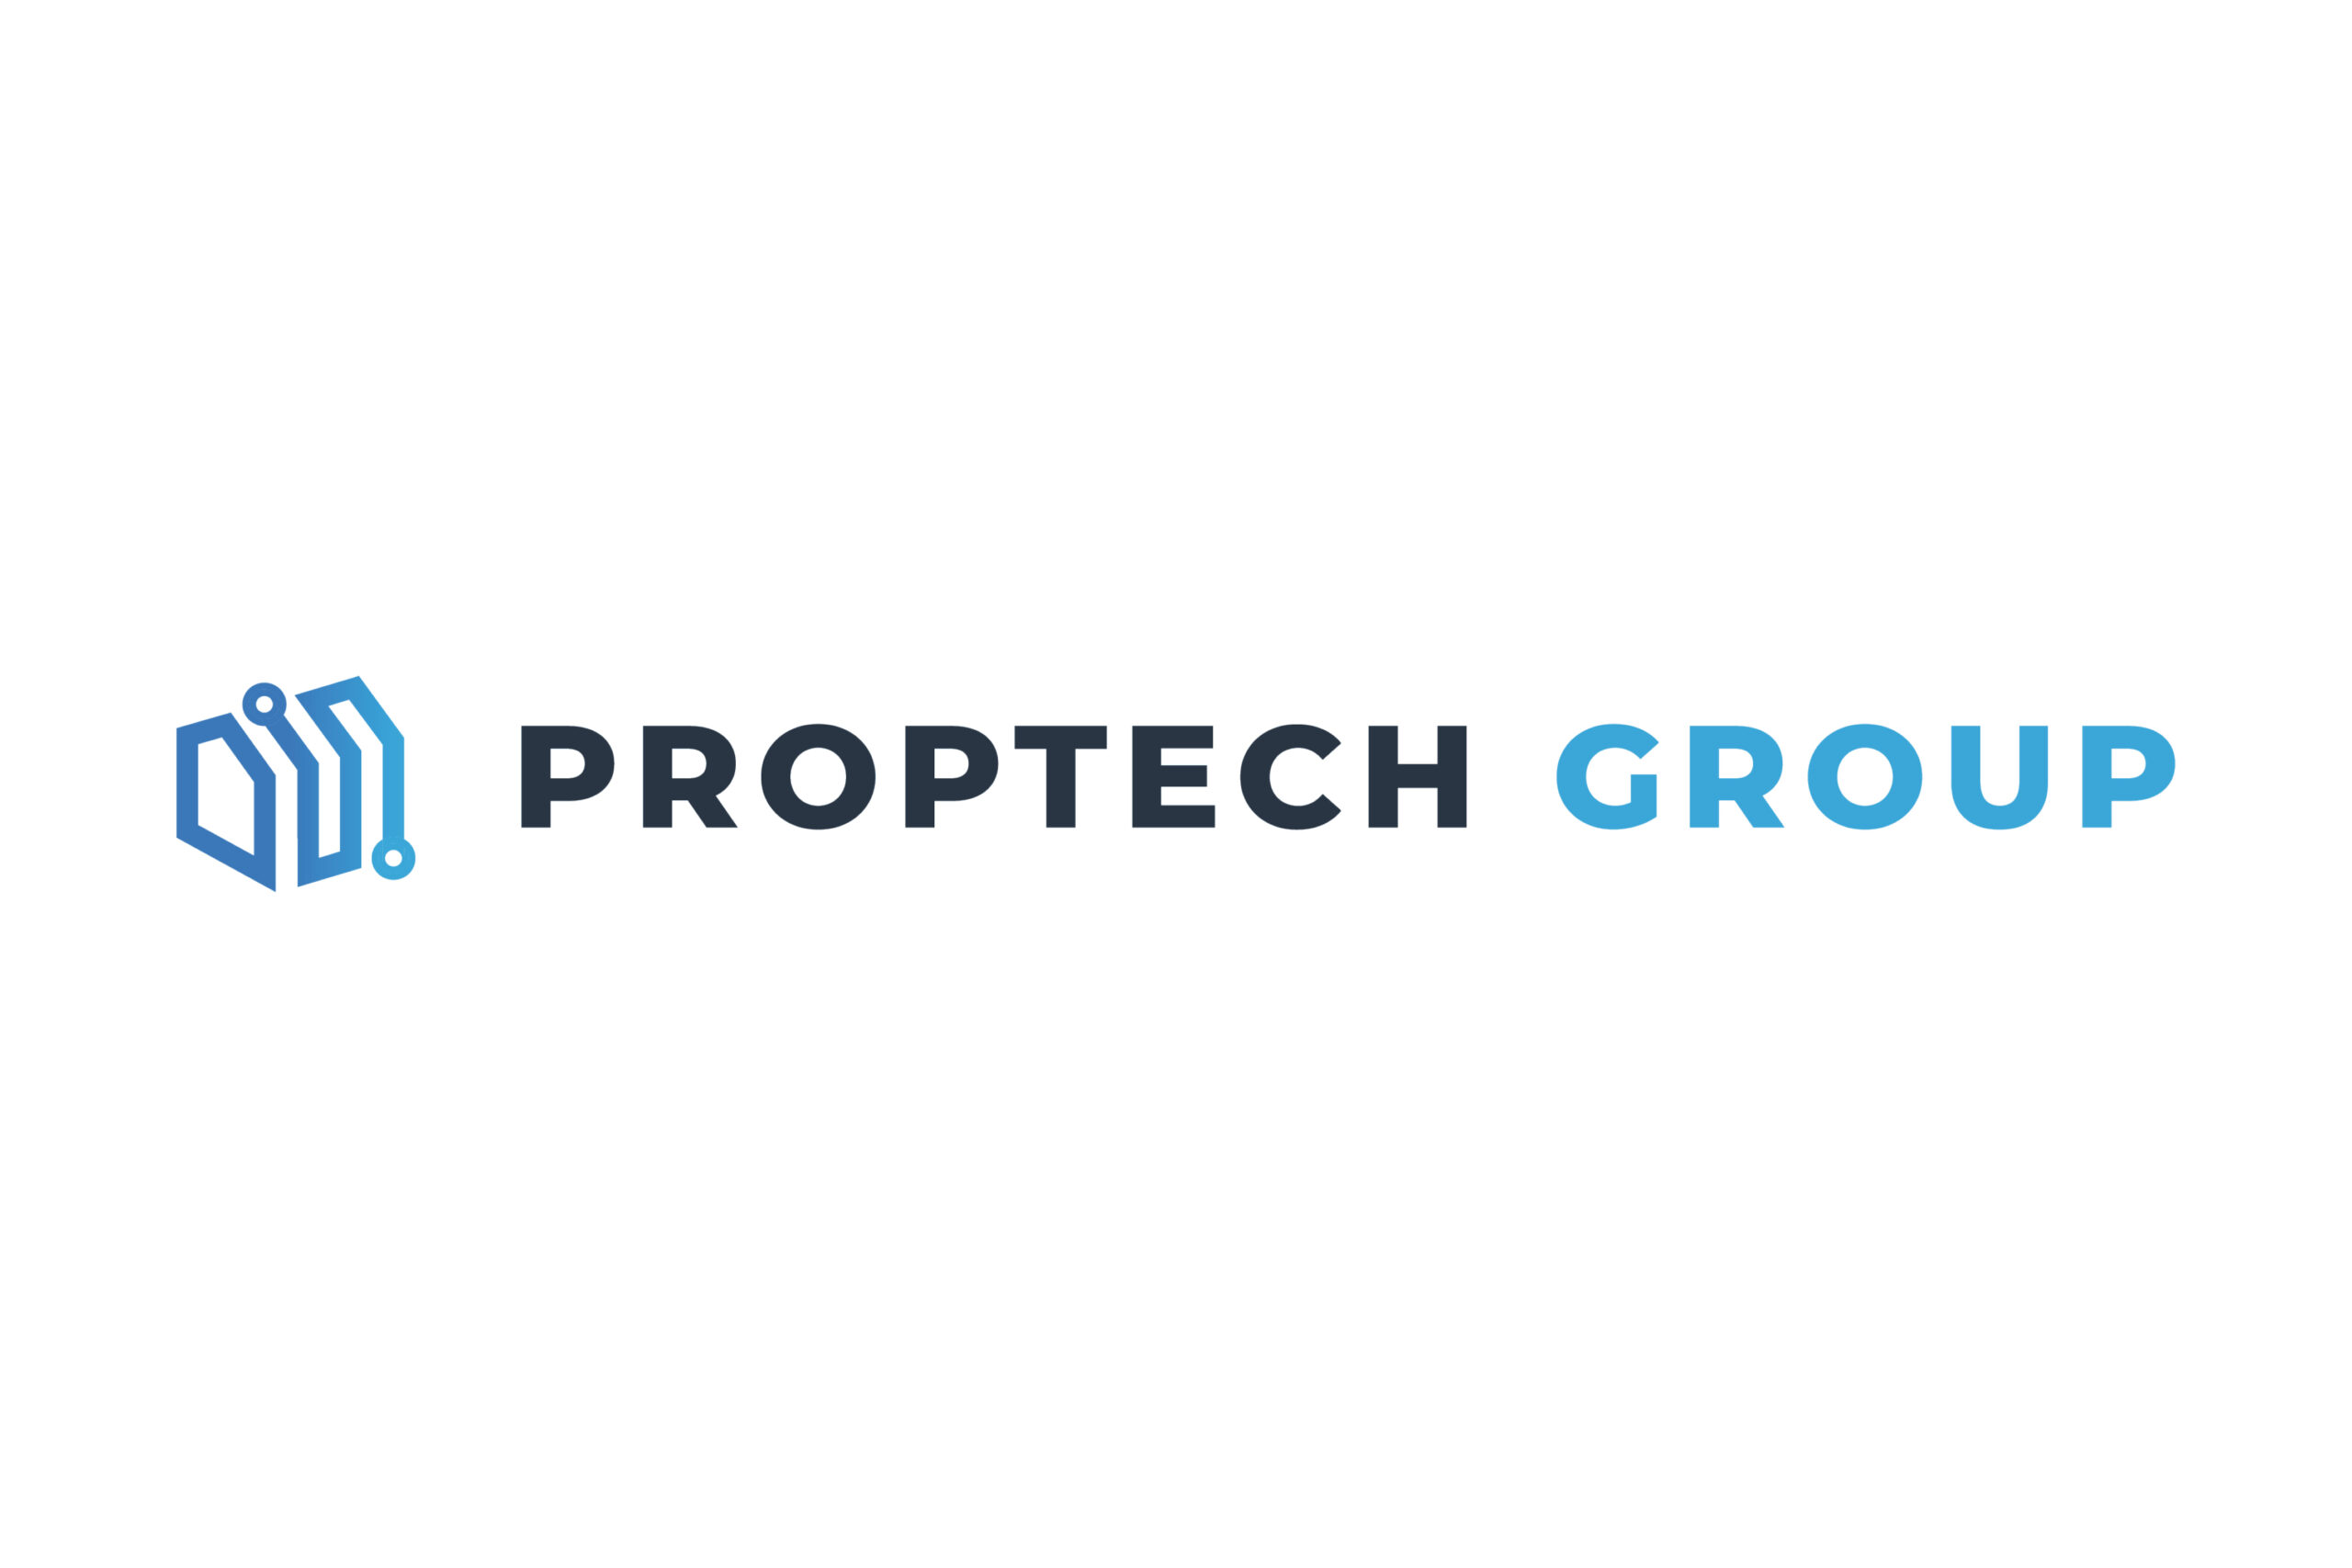 Proptech Group